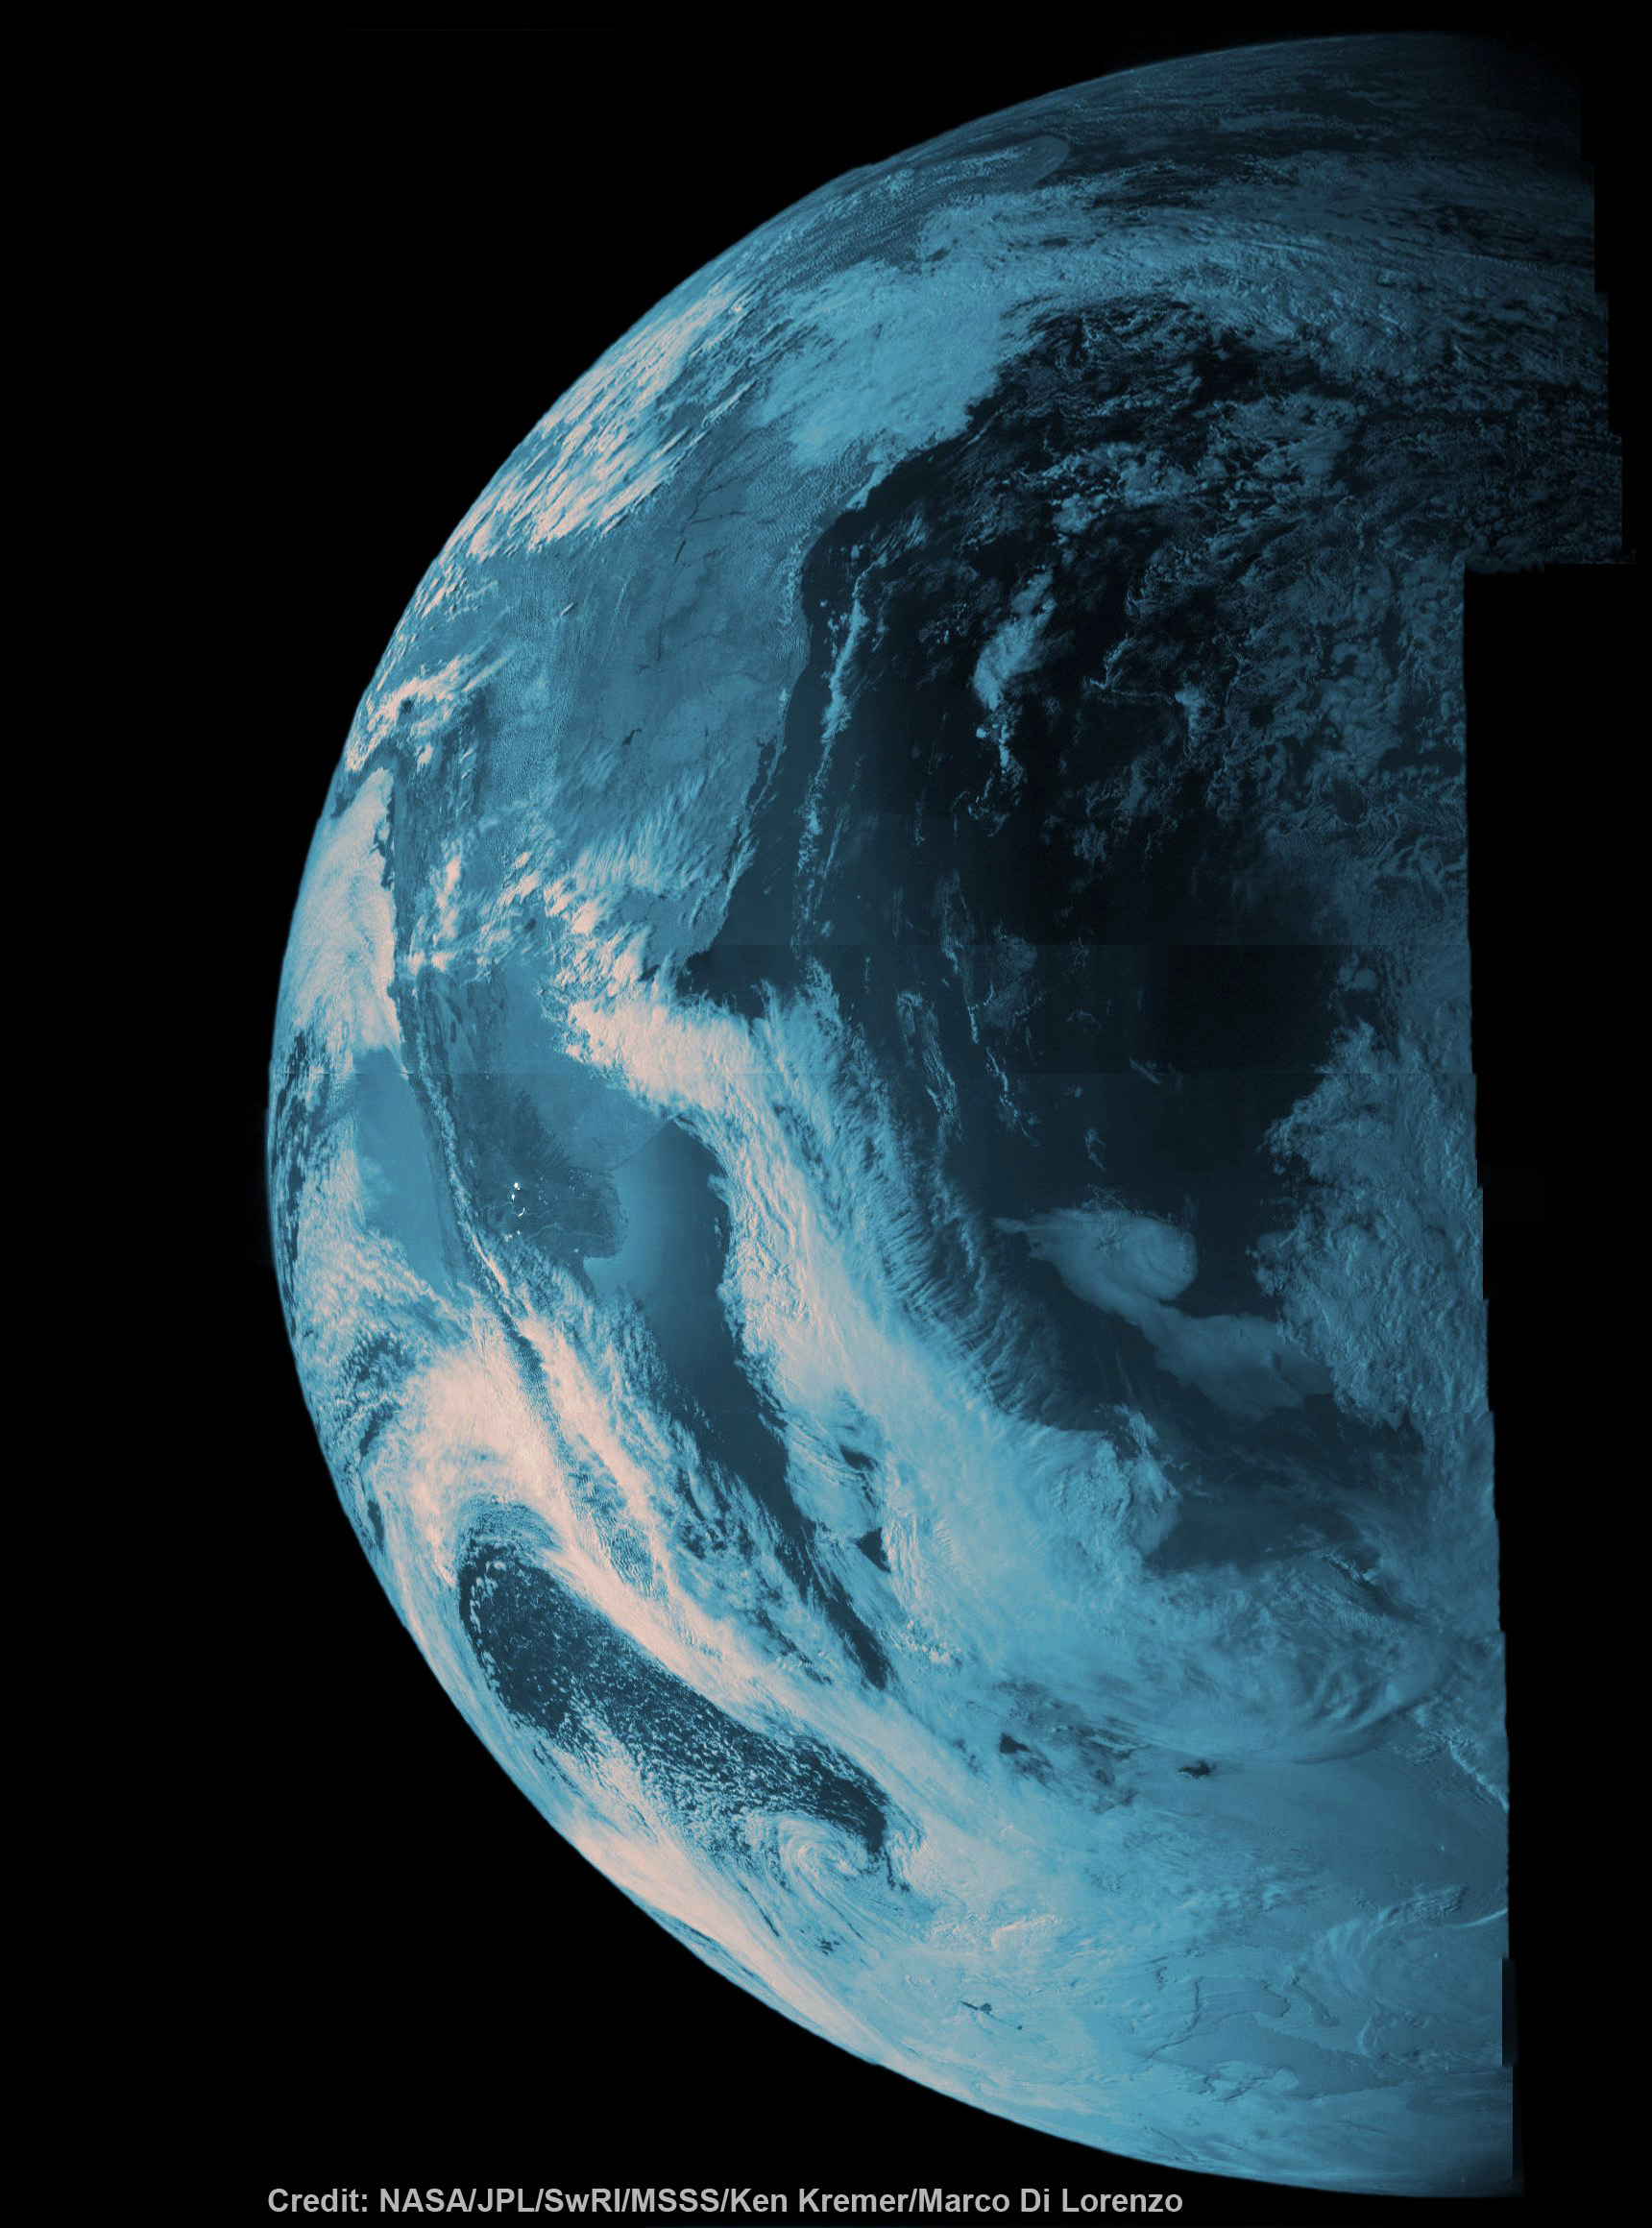 NASA’s Juno probe captured the image data for this composite picture during its Earth flyby on Oct. 9, 2013 over Argentina, South America and the southern Atlantic Ocean. Raw imagery was reconstructed and aligned by Ken Kremer and Marco Di Lorenzo, and false-color blue has been added to the view taken by a near-infrared filter that is typically used to detect methane. Credit: NASA/JPL/SwRI/MSSS/Ken Kremer/Marco Di Lorenzo